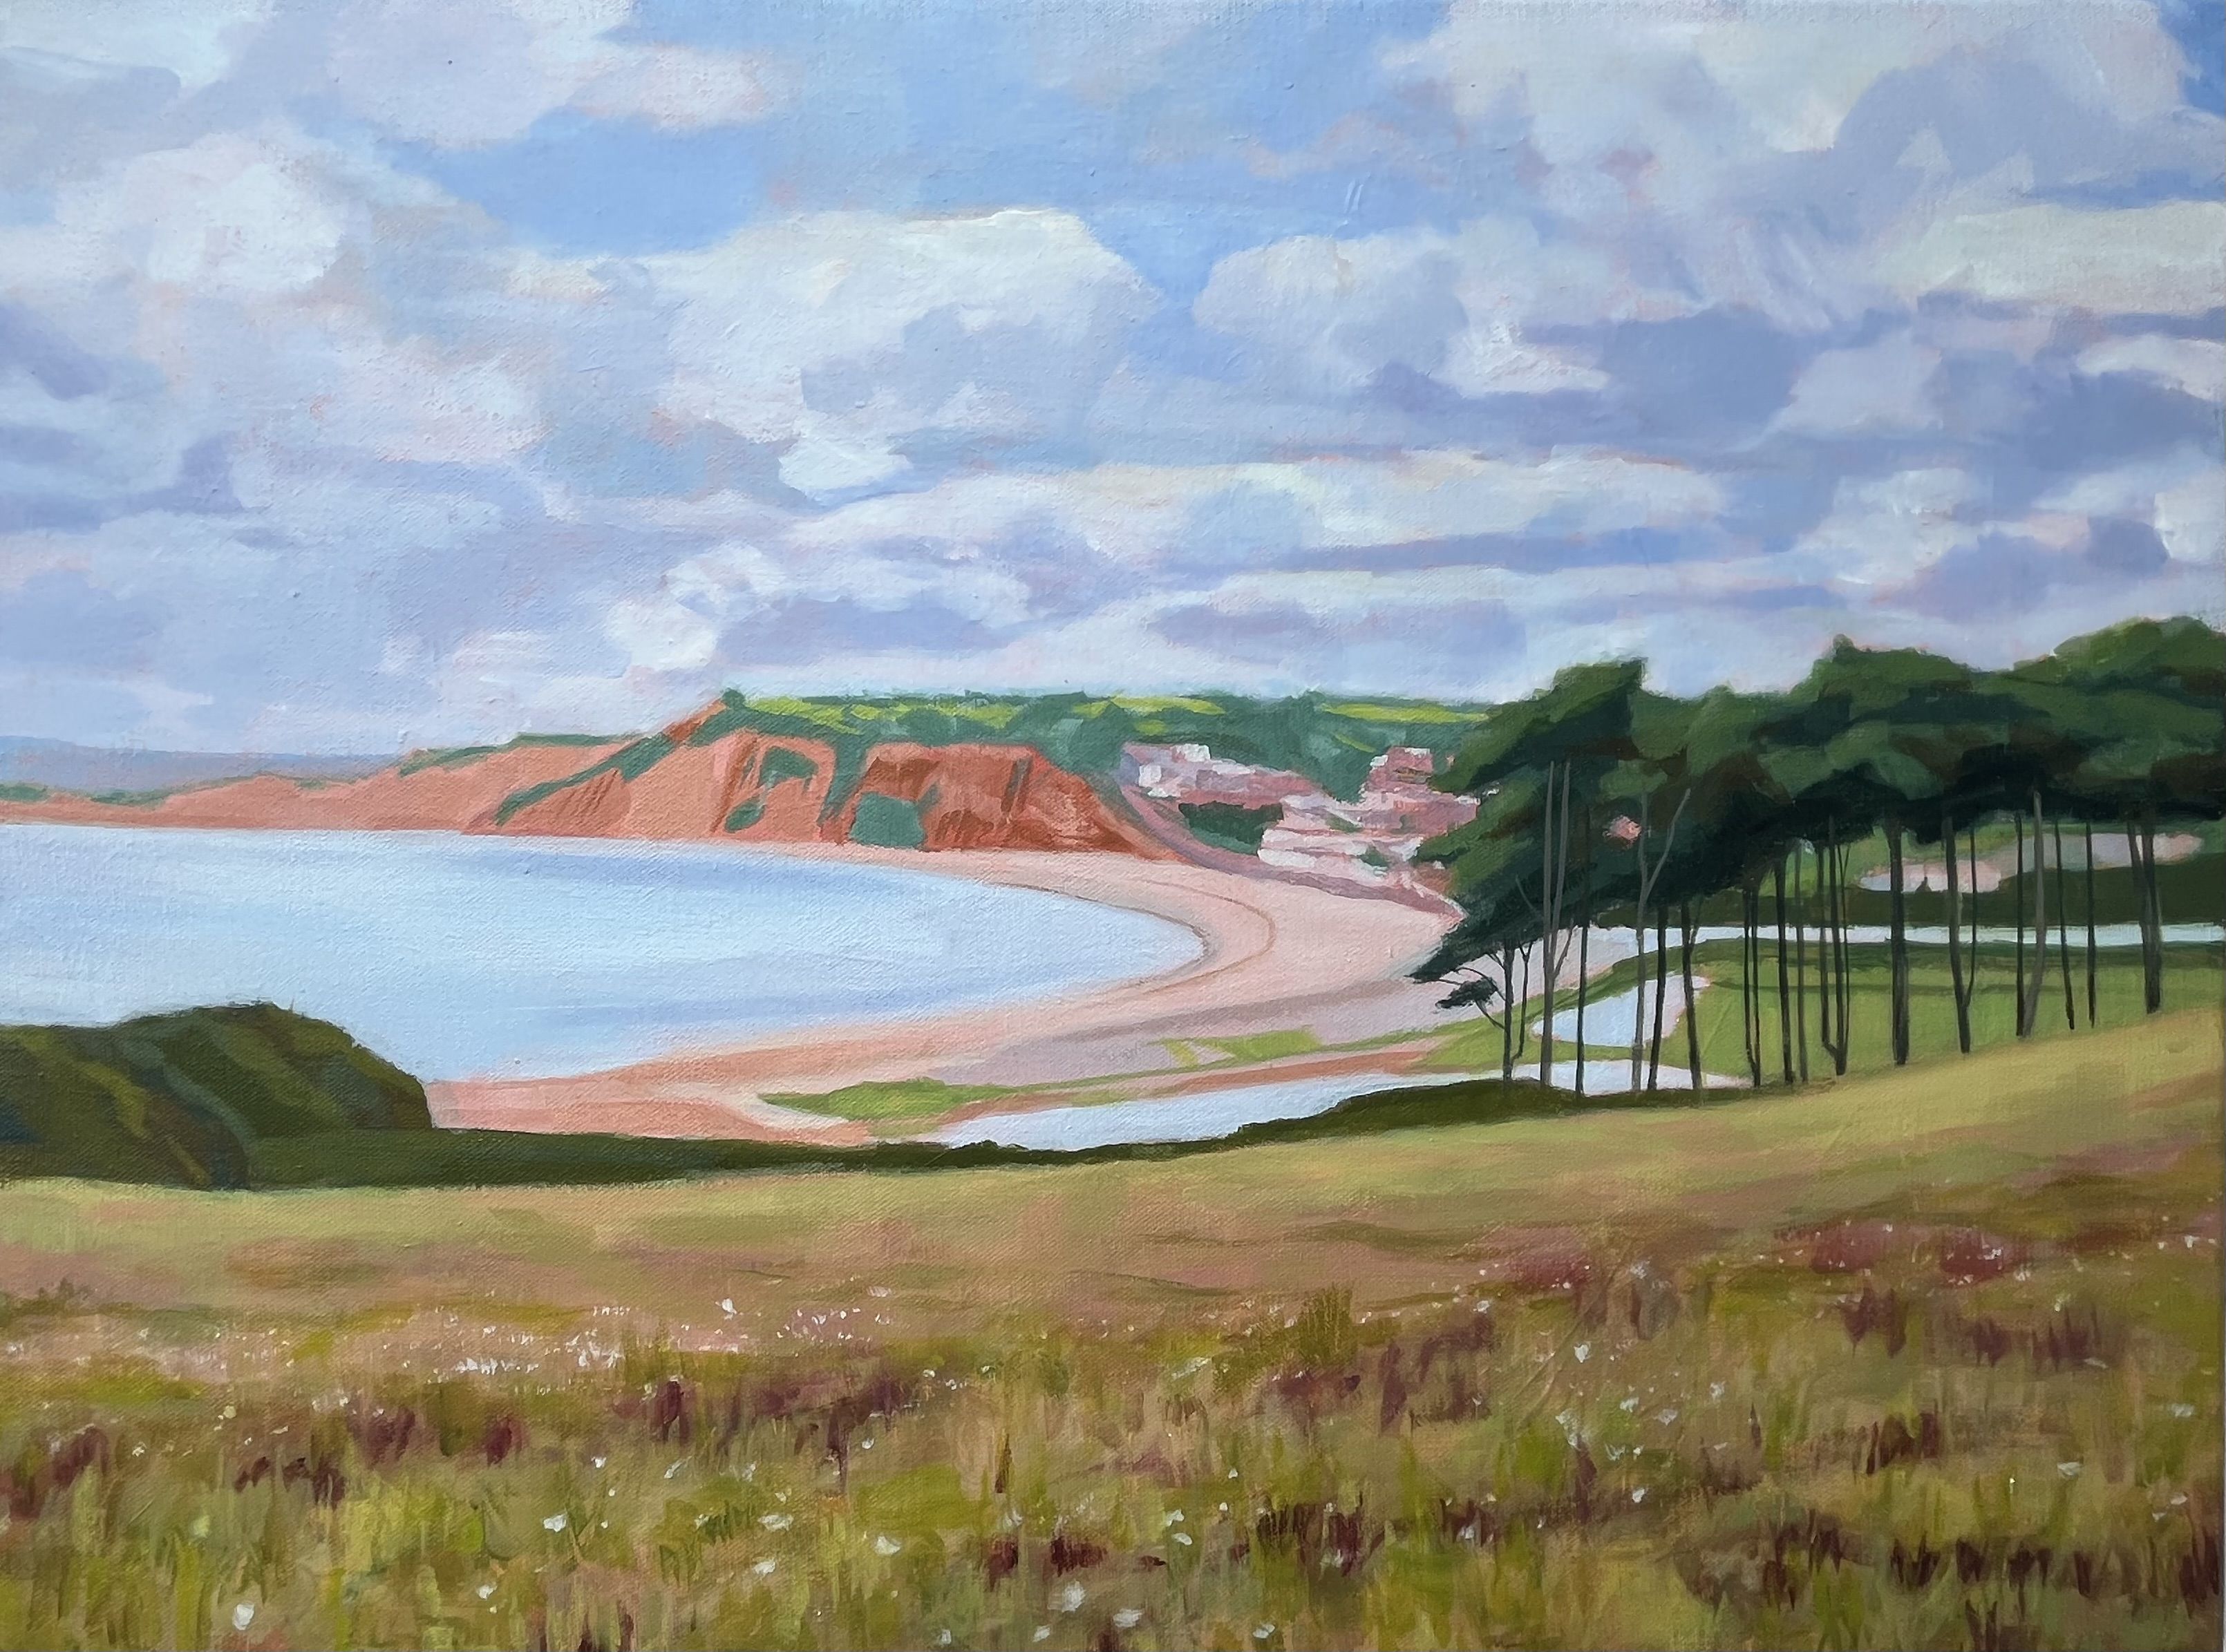 View of Budleigh Salterton from the Cliff by Margaret Crutchley